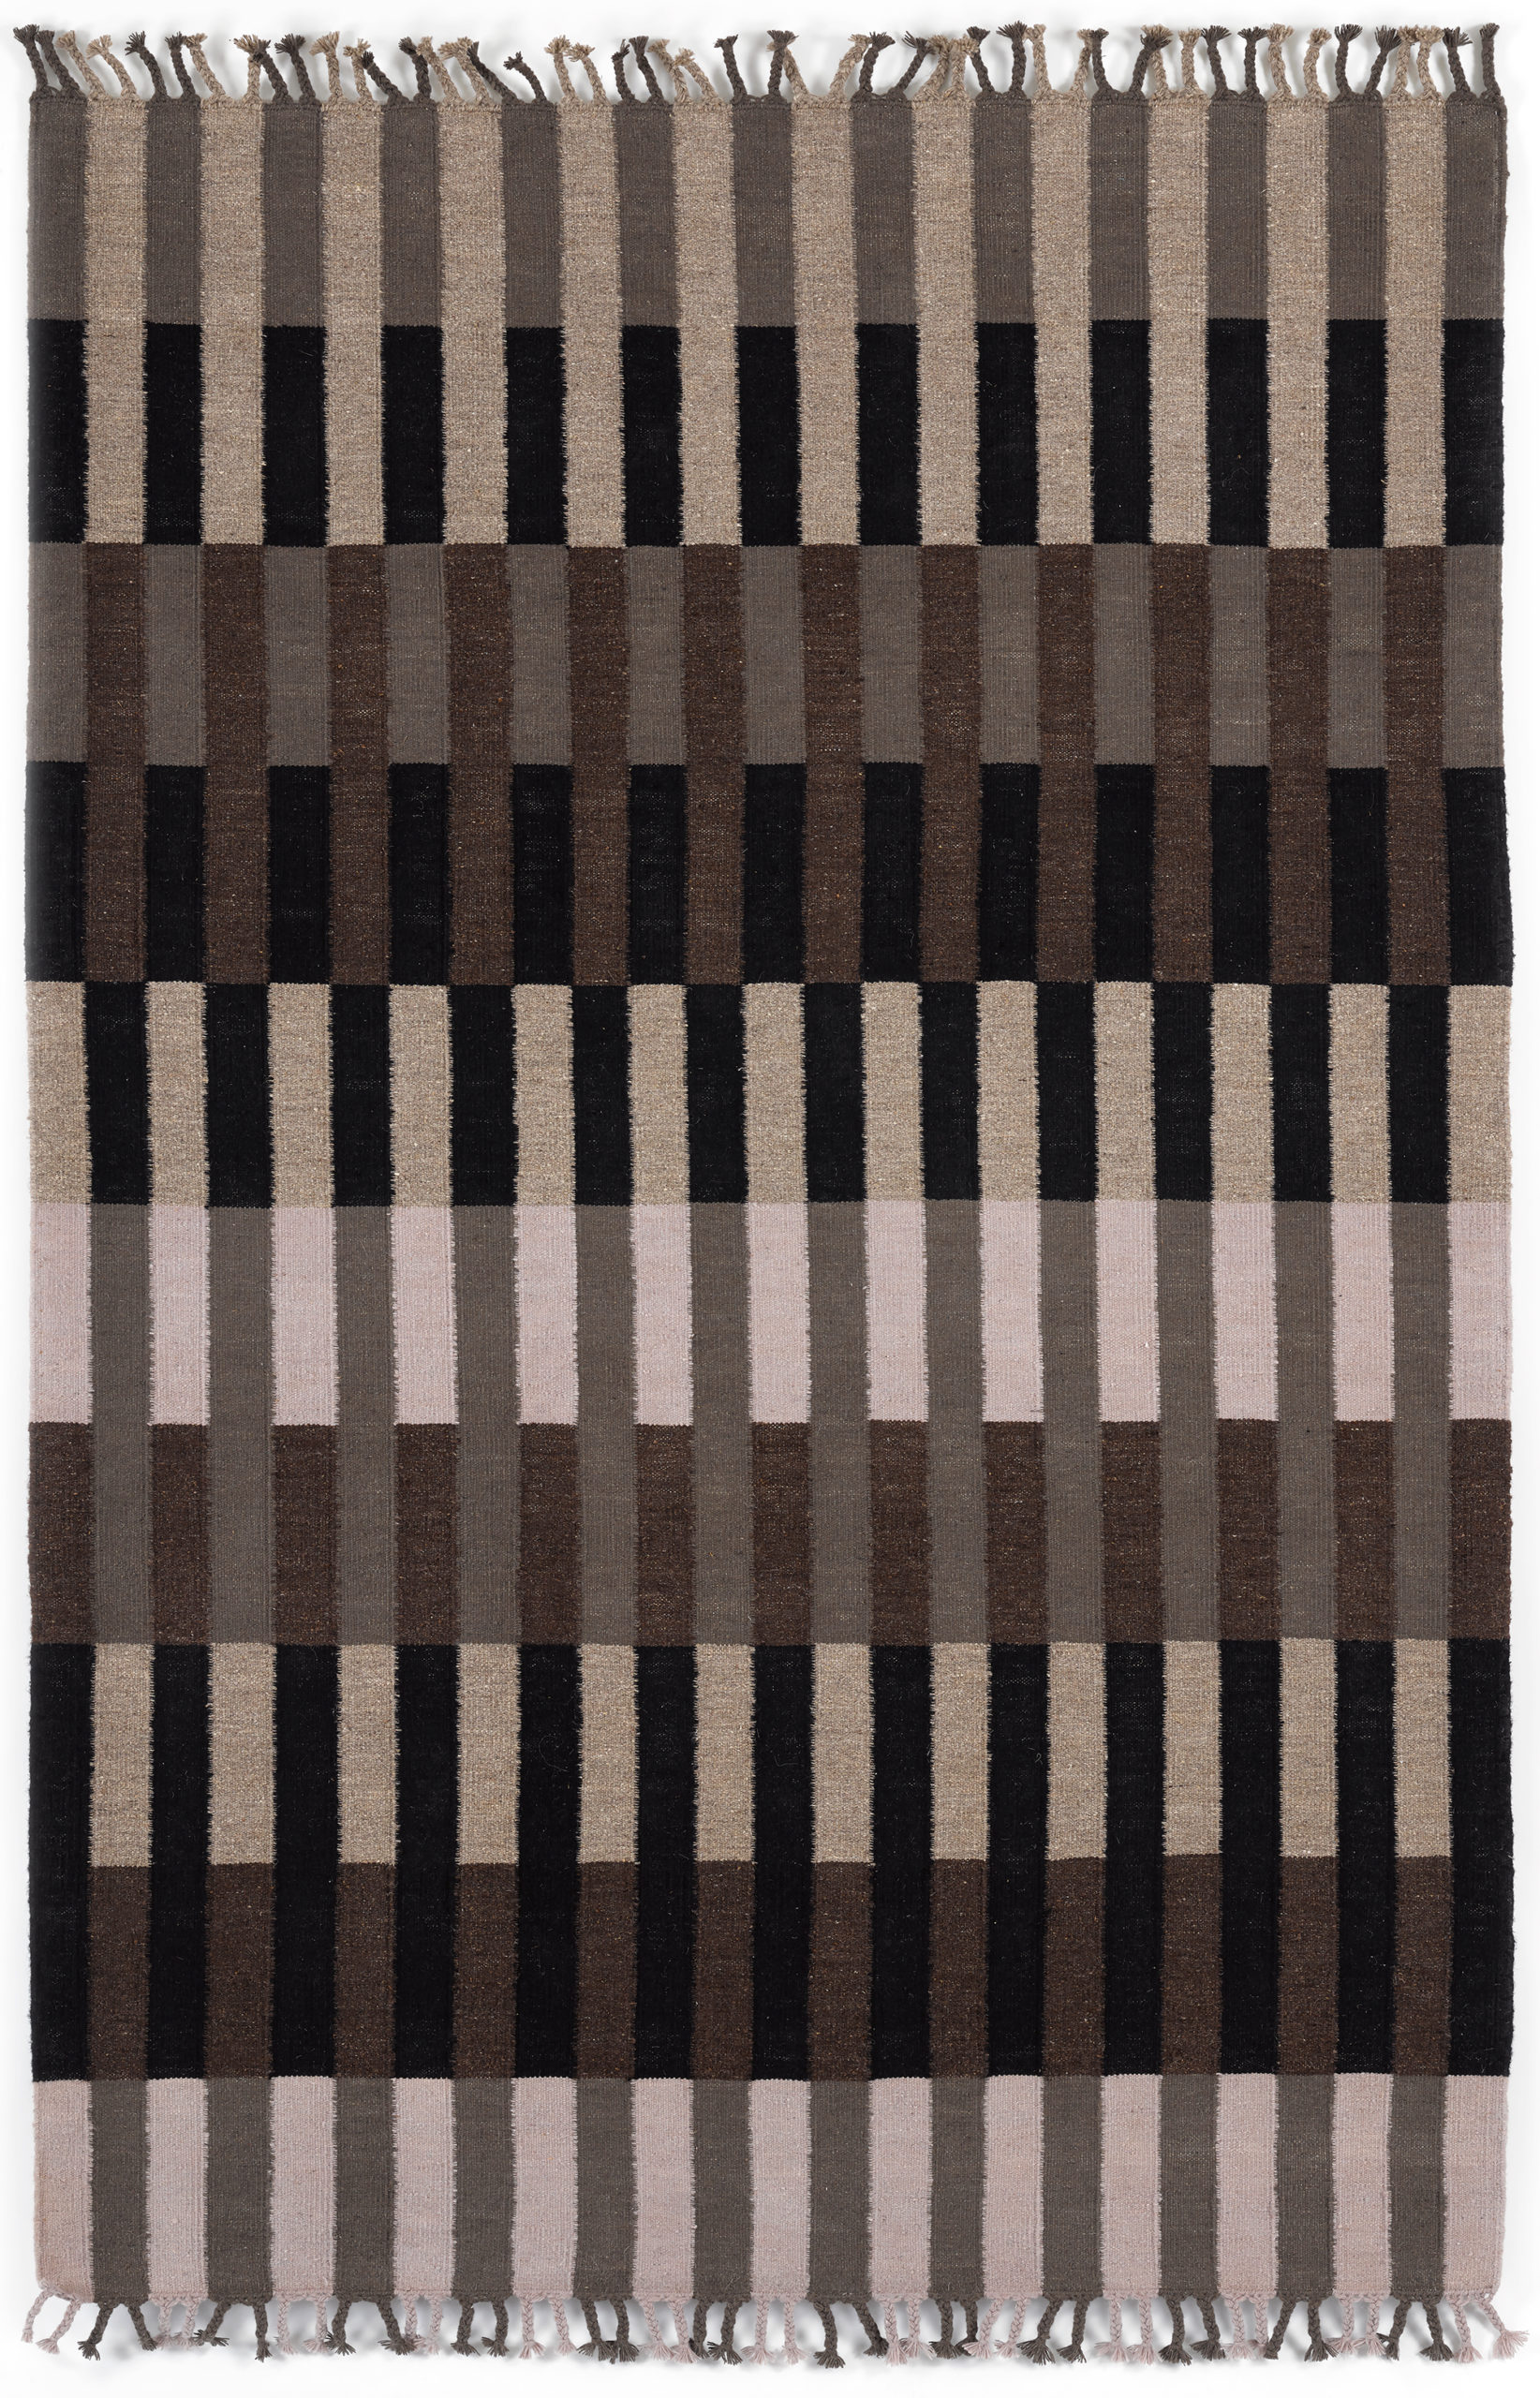 crosby_street_studios_products_CSS_Lineage_Ruma_FullRug-scaled-1